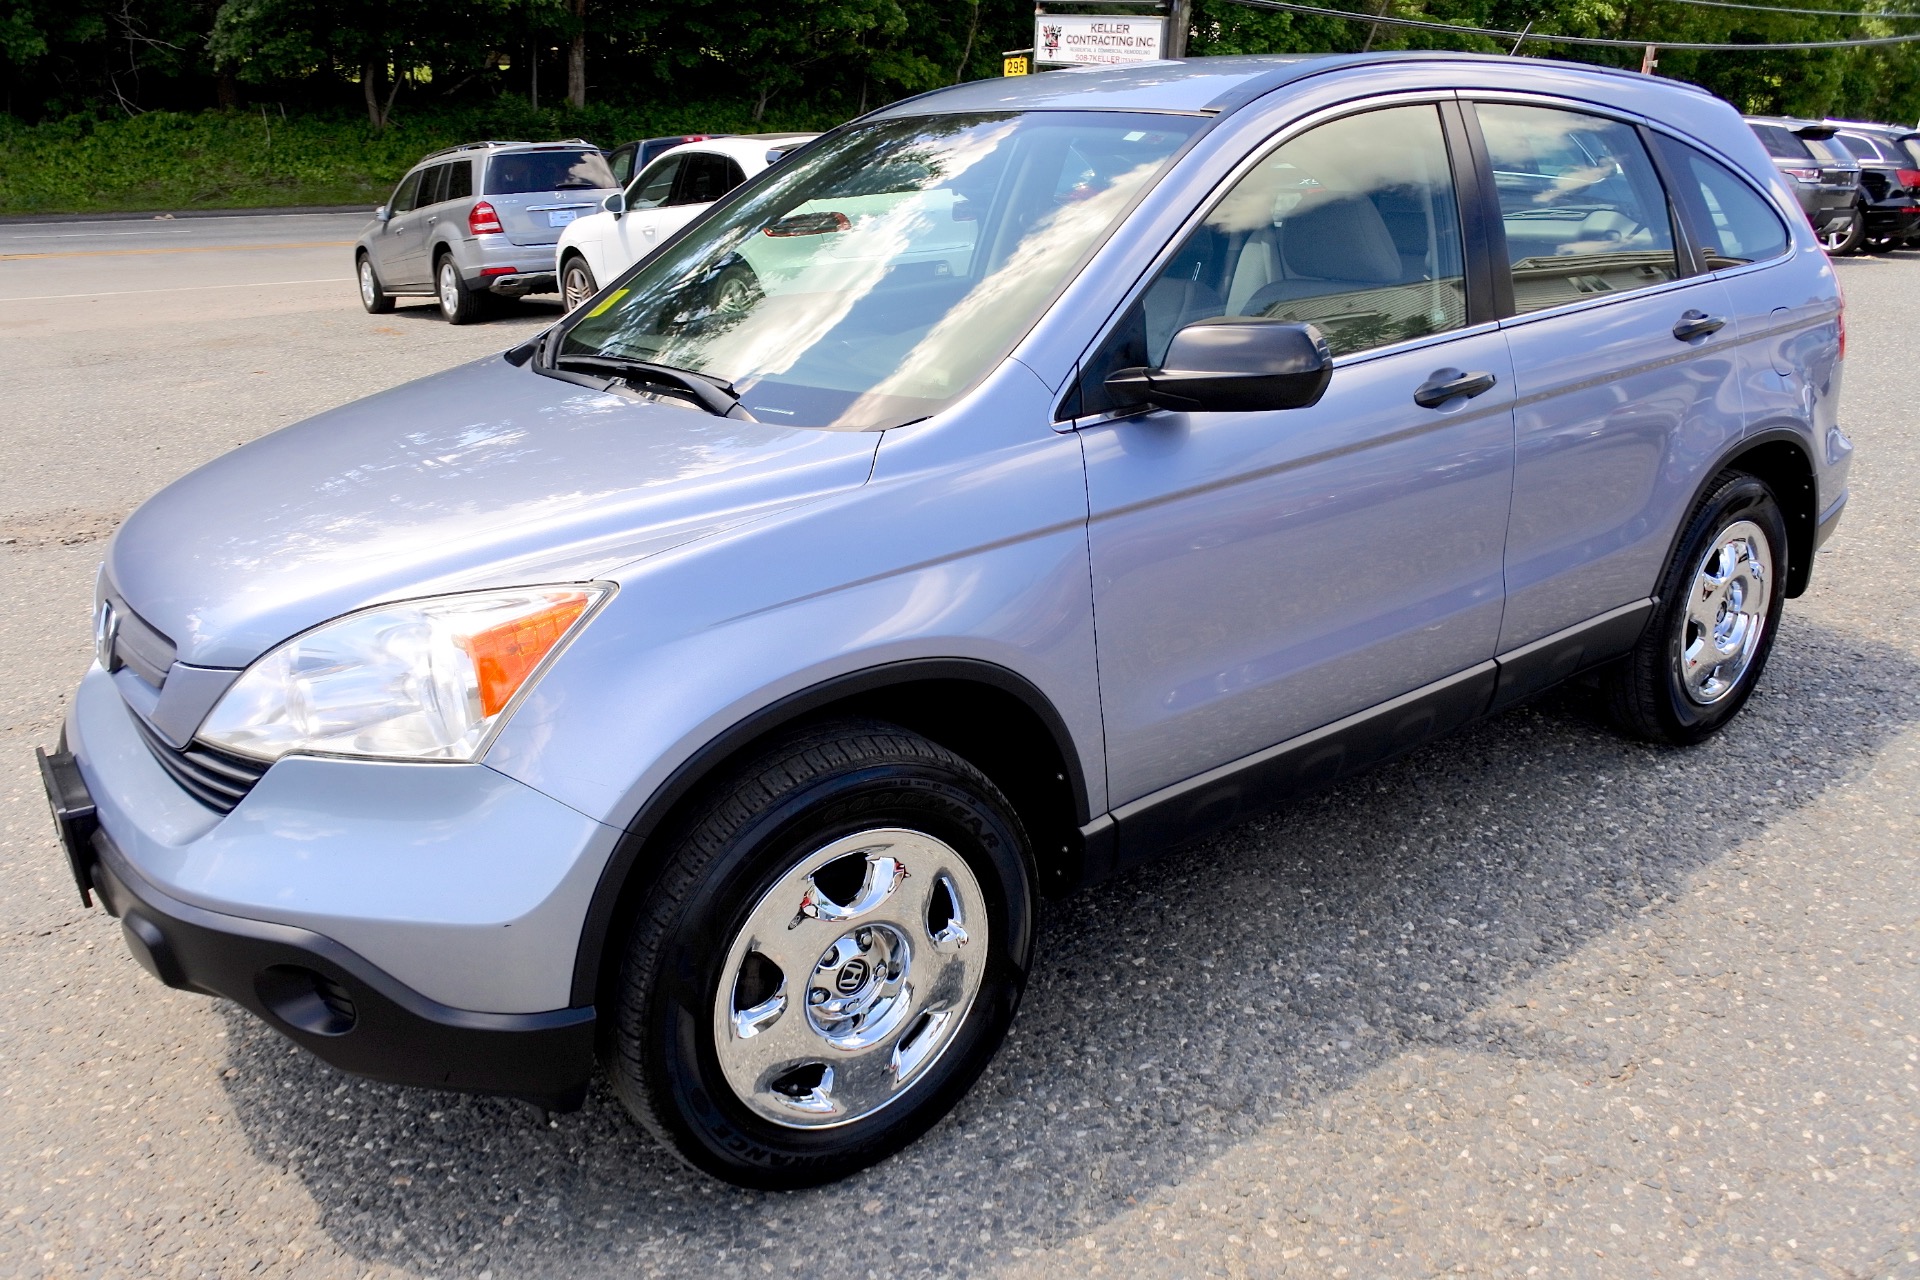 Used 2008 Honda Cr-v 4WD 5dr LX For Sale ($7,888) | Metro West ...